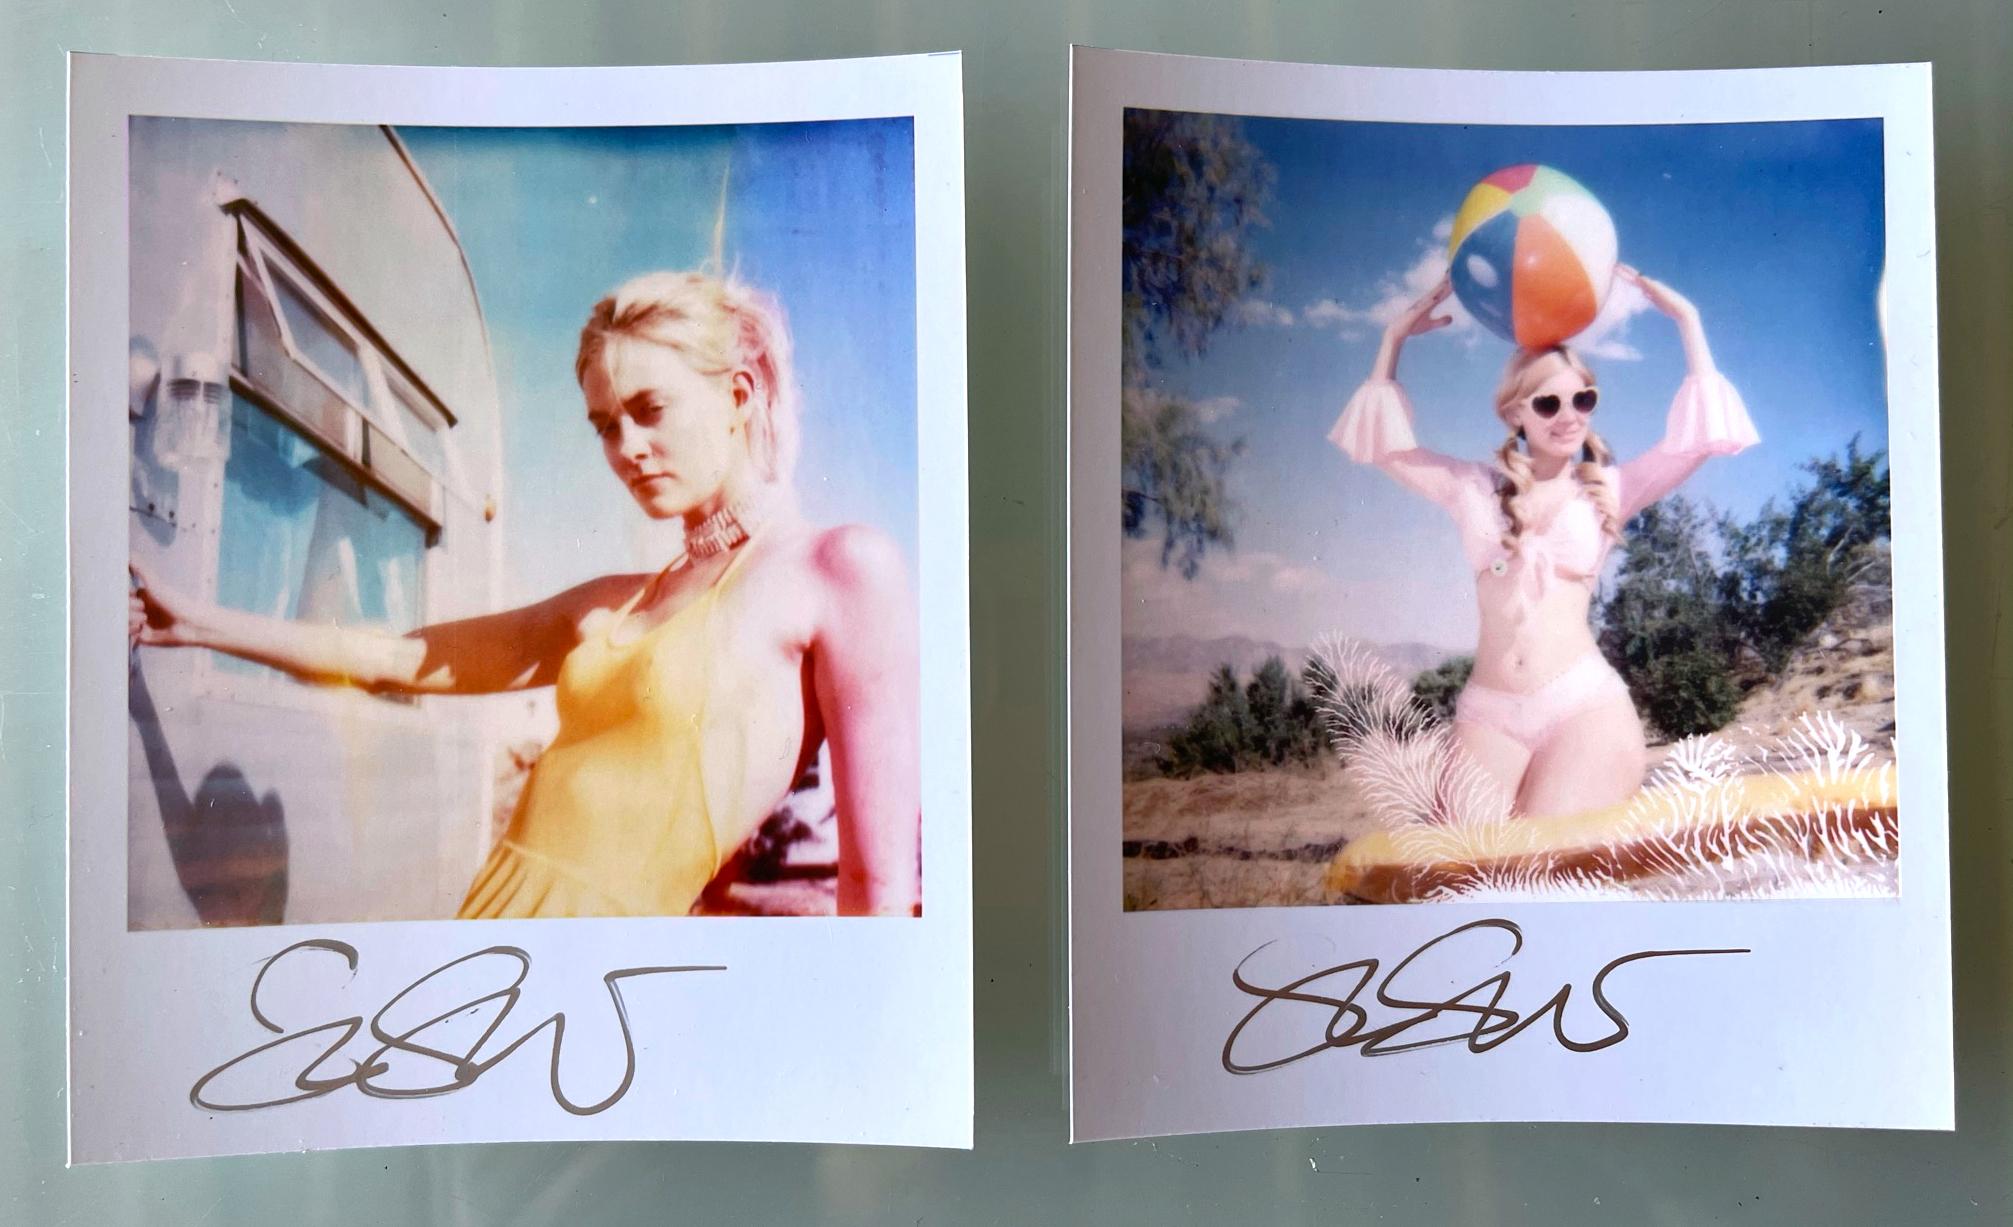 Stefanie Schneider's Mini
Caitlin aka Jane Bond & Miss Moneypenny with Beach Ball (Heavenly Falls) - 2005

signed in front, not mounted. 
Digital Color Photographs based on a Polaroid. 

Polaroid sized open Editions 1999-2016
10.7 x 8.8cm (Image